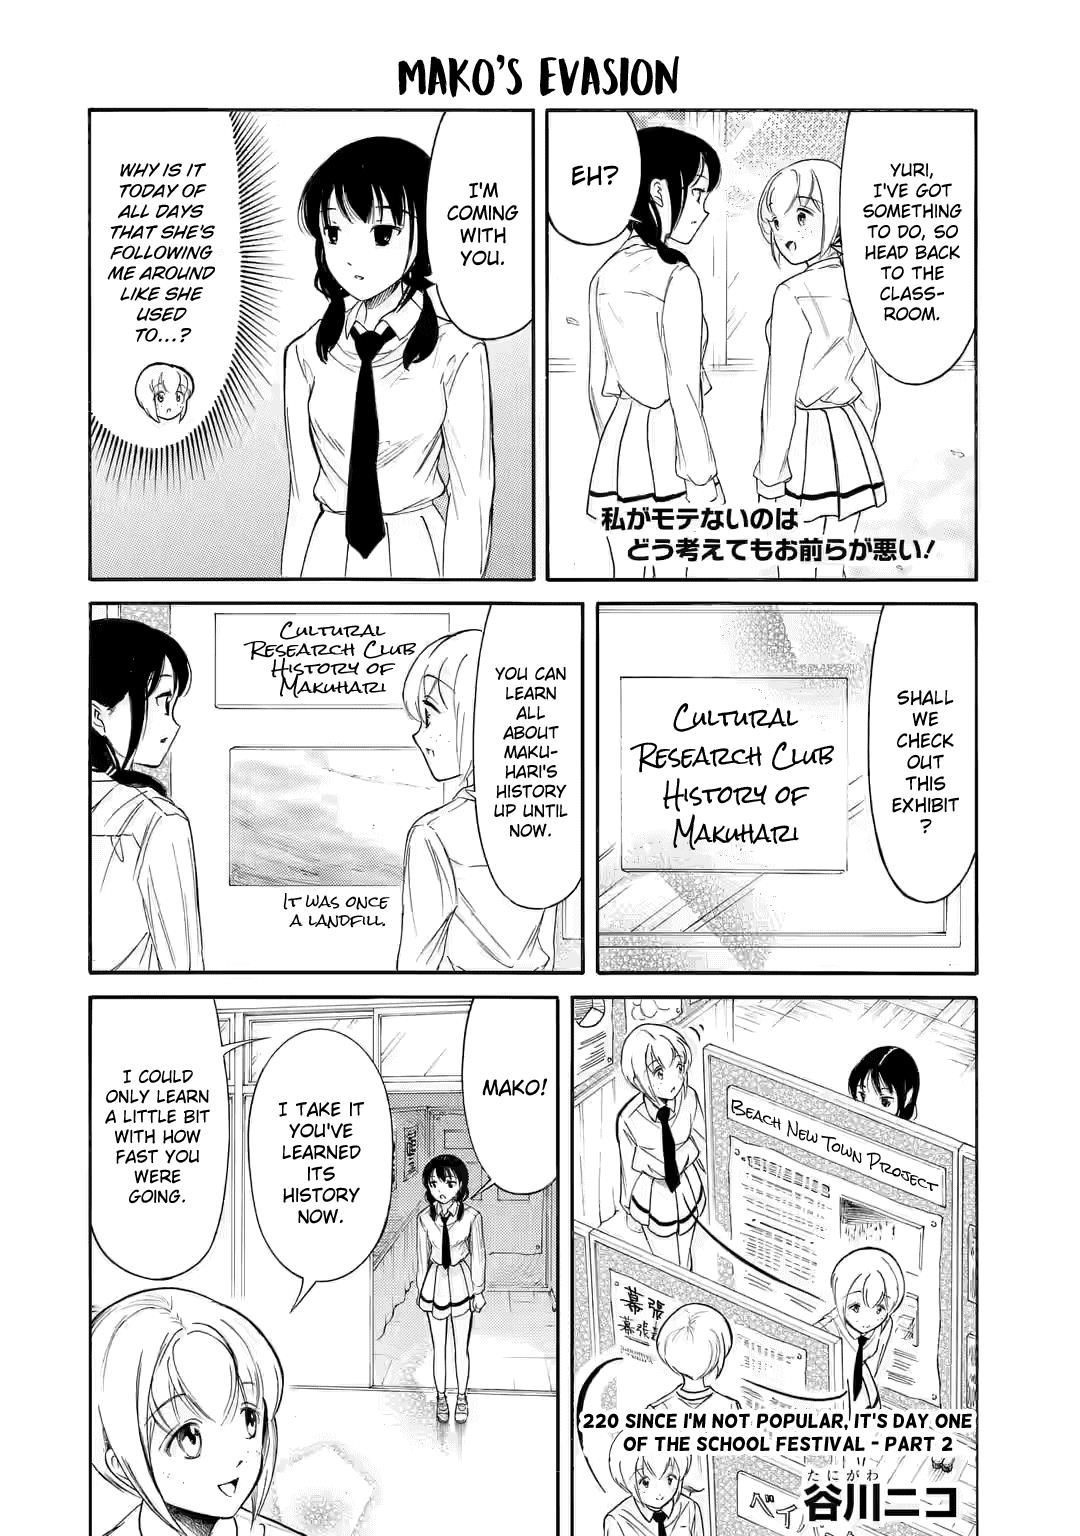 It's Not My Fault That I'm Not Popular! Chapter 220.2: Since I'm Not Popular, It's Day One Of The School Festival (Part 2) - Picture 1